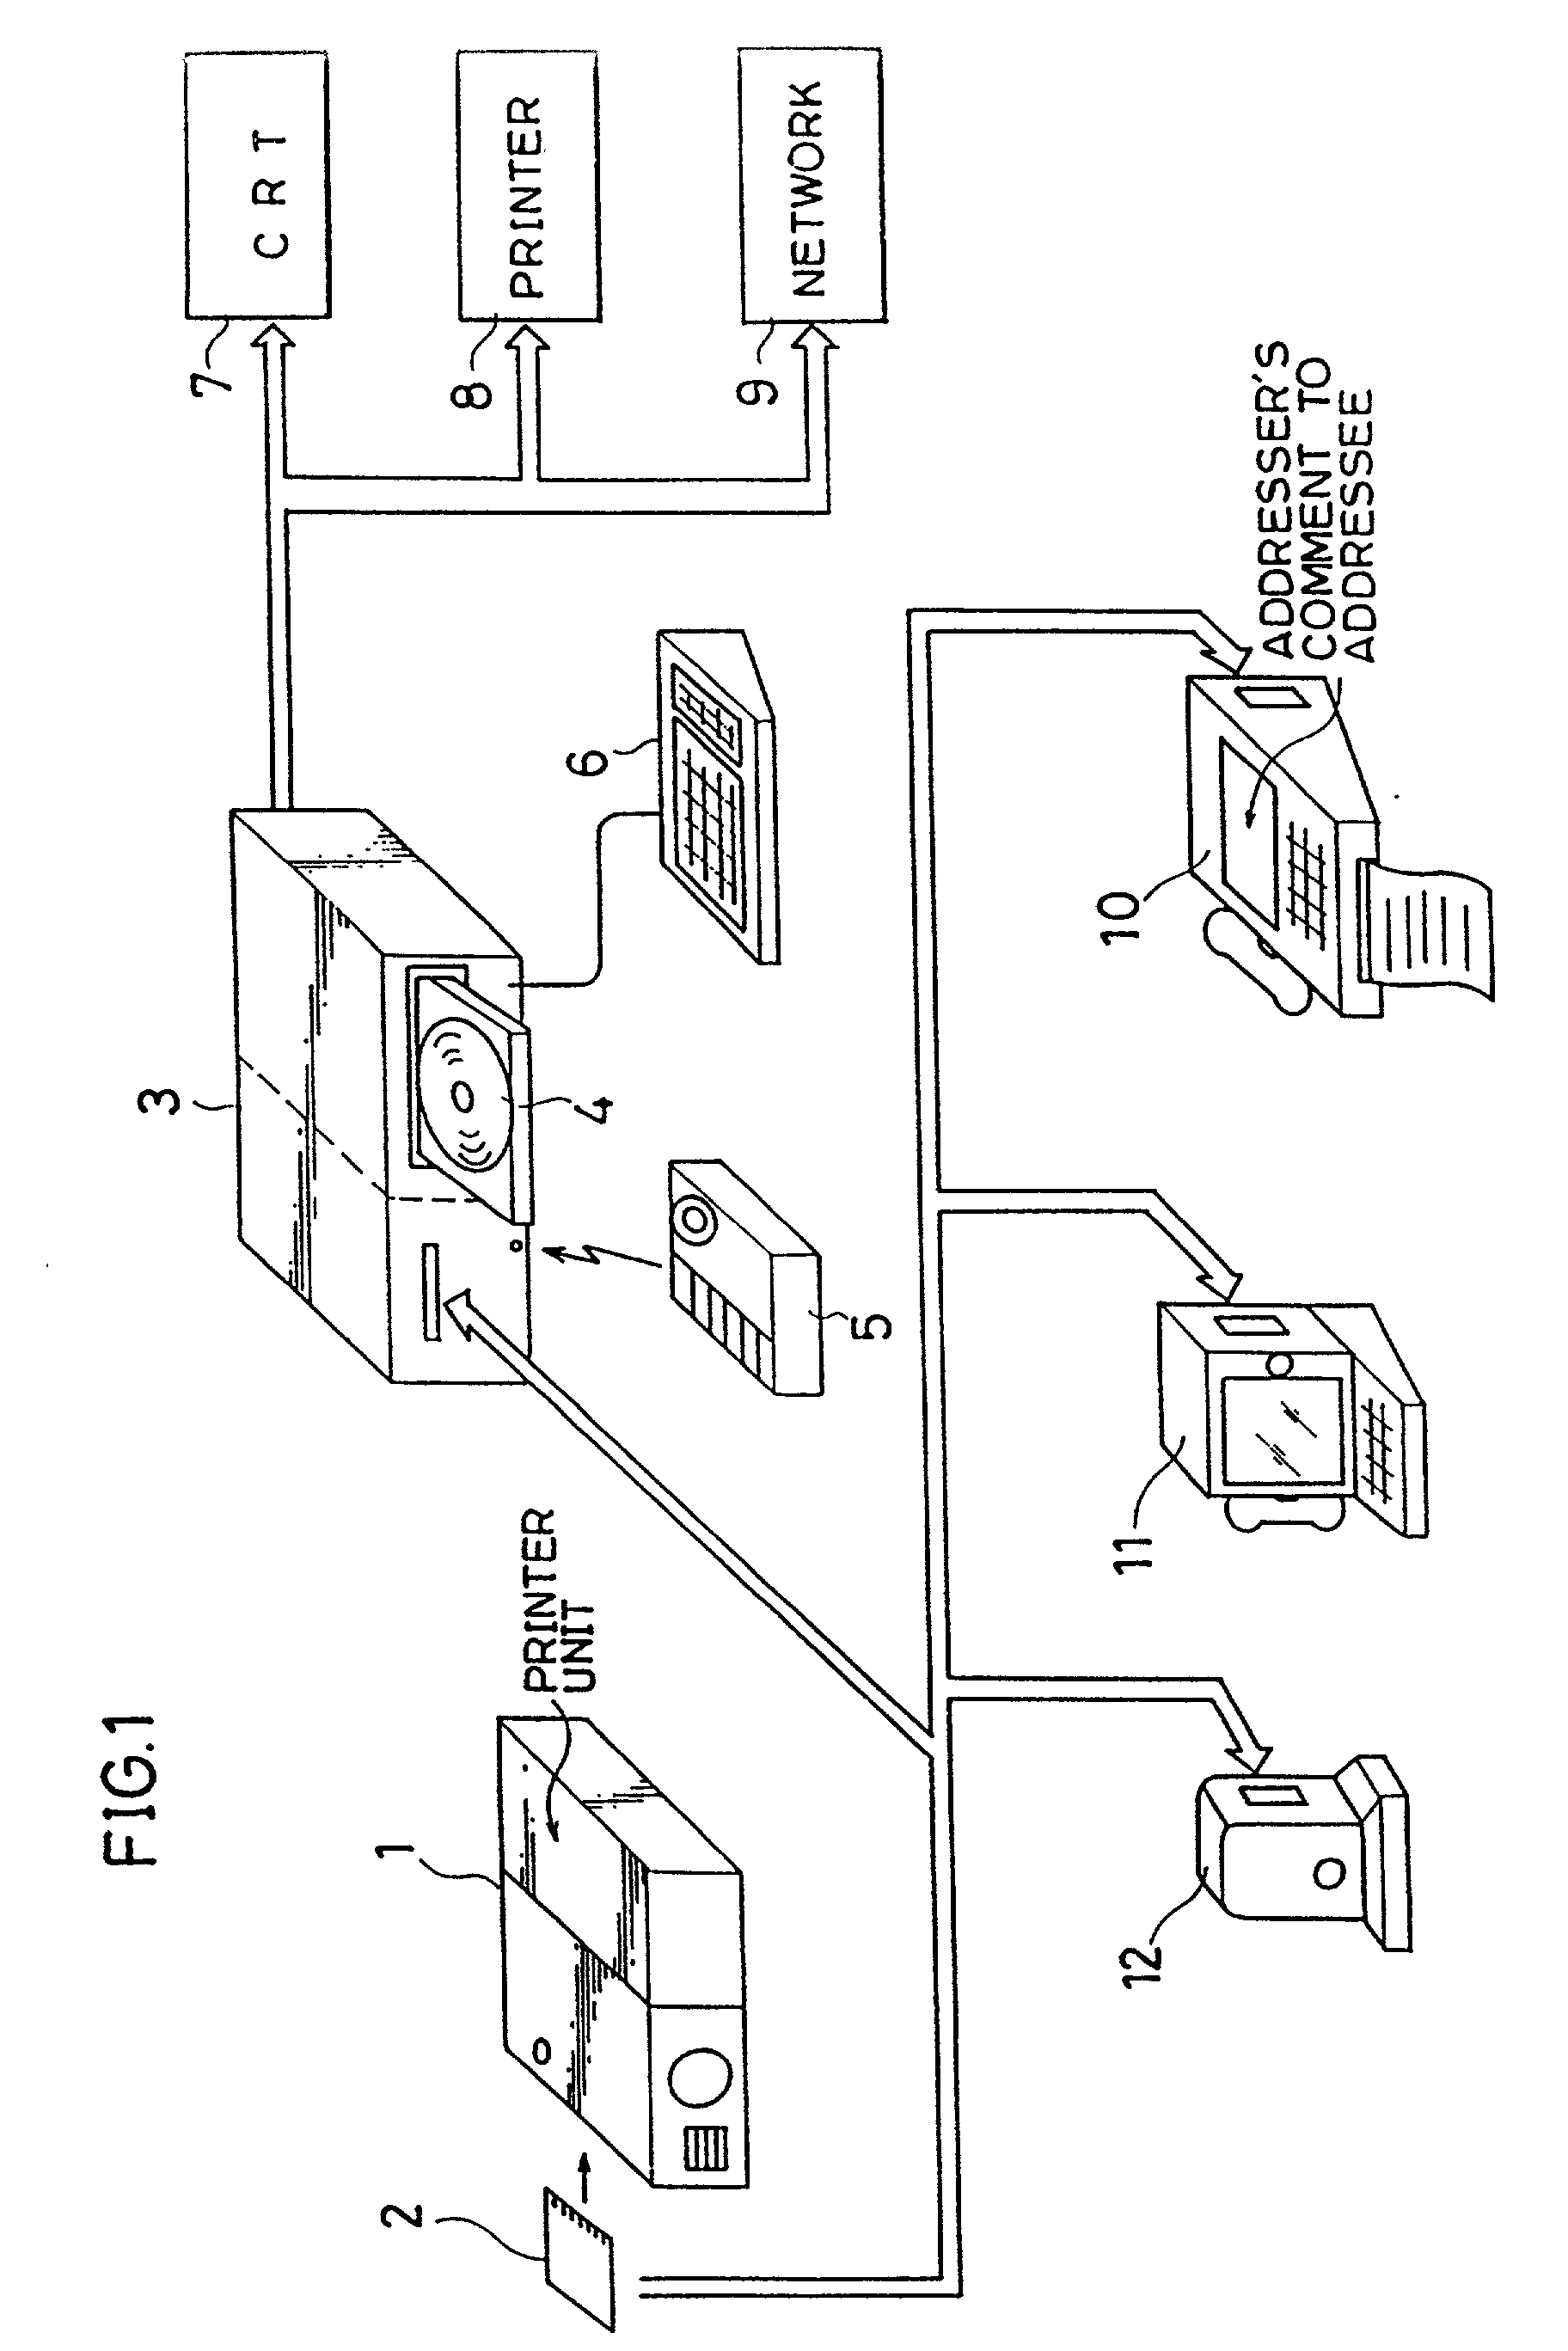 Image information processing system